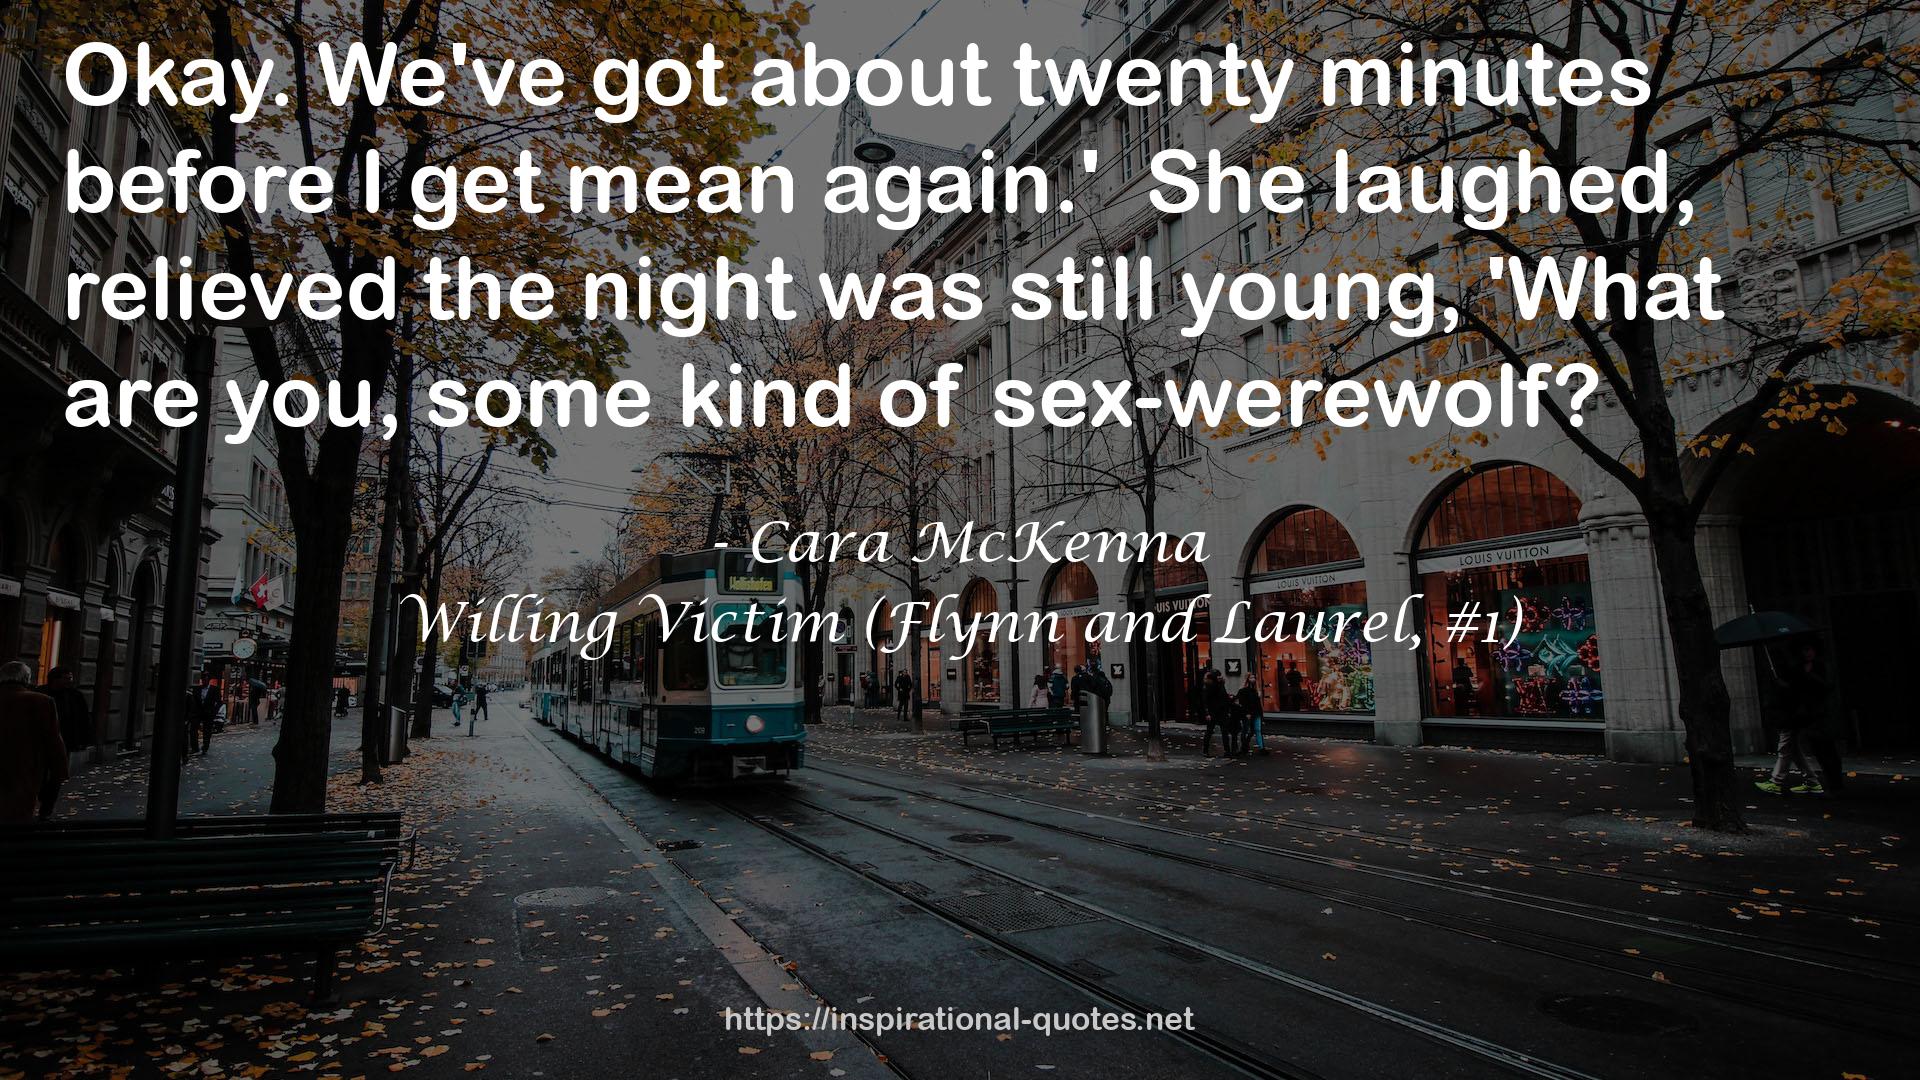 Willing Victim (Flynn and Laurel, #1) QUOTES